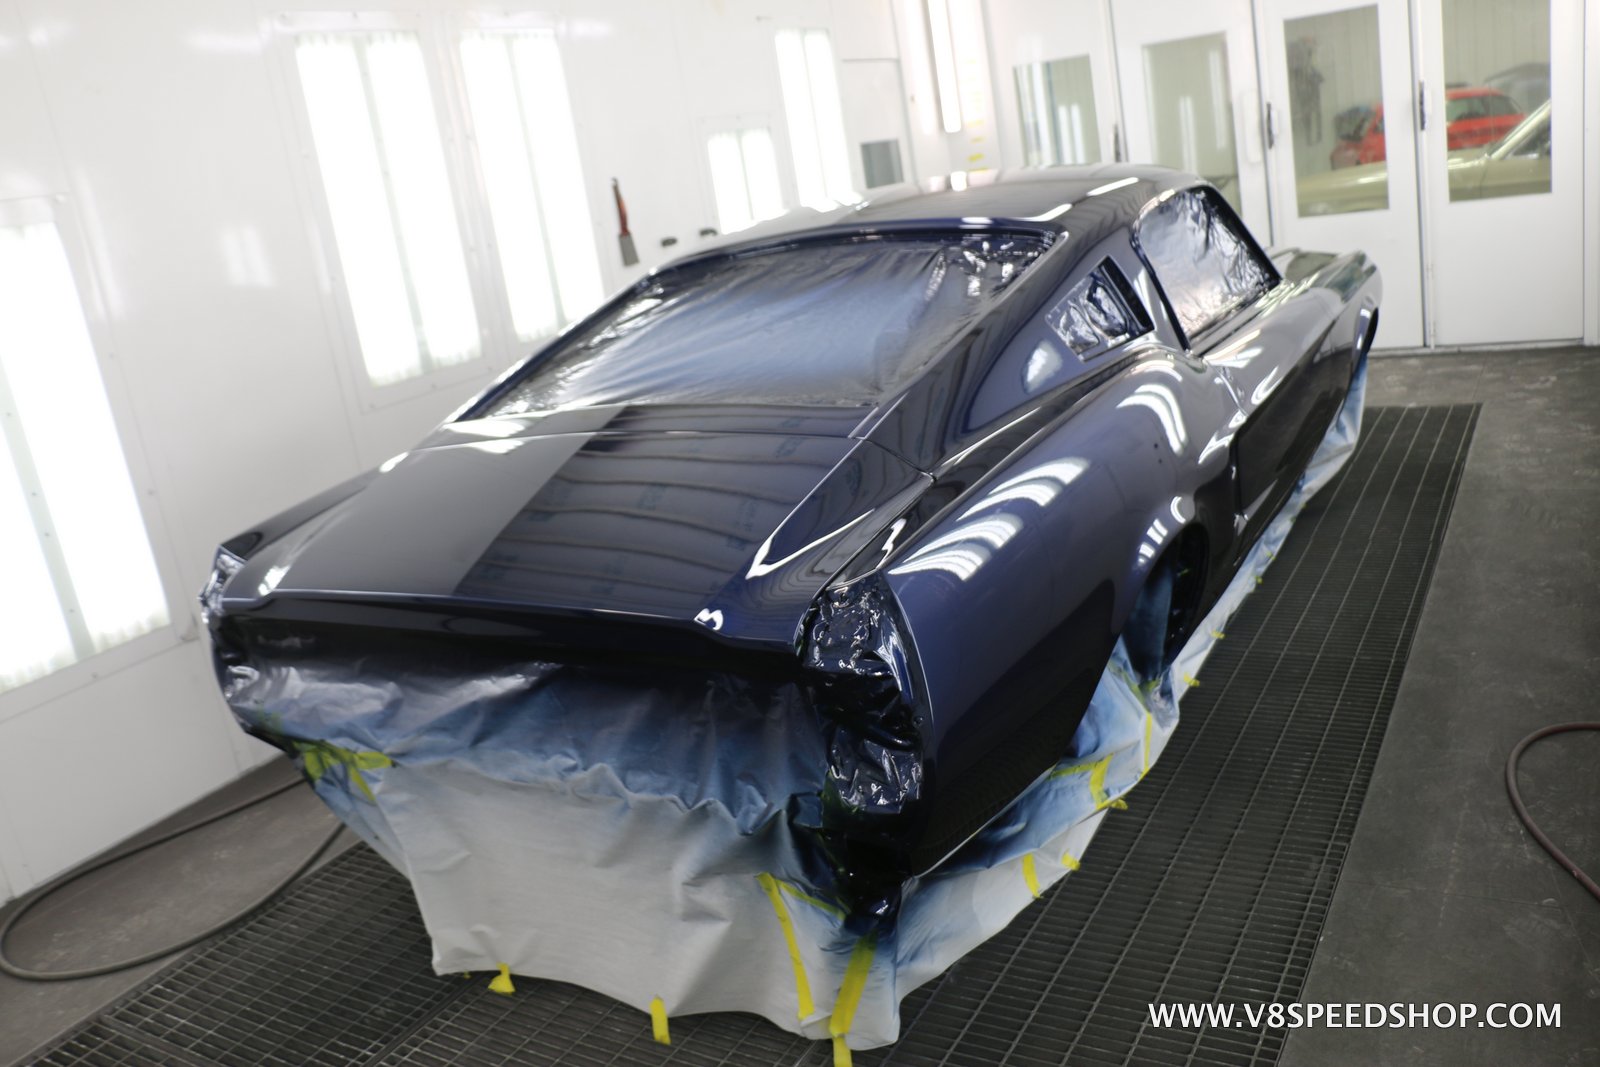 1967 Ford Mustang Body Restoration Photo Gallery at V8 Speed and Resto Shop